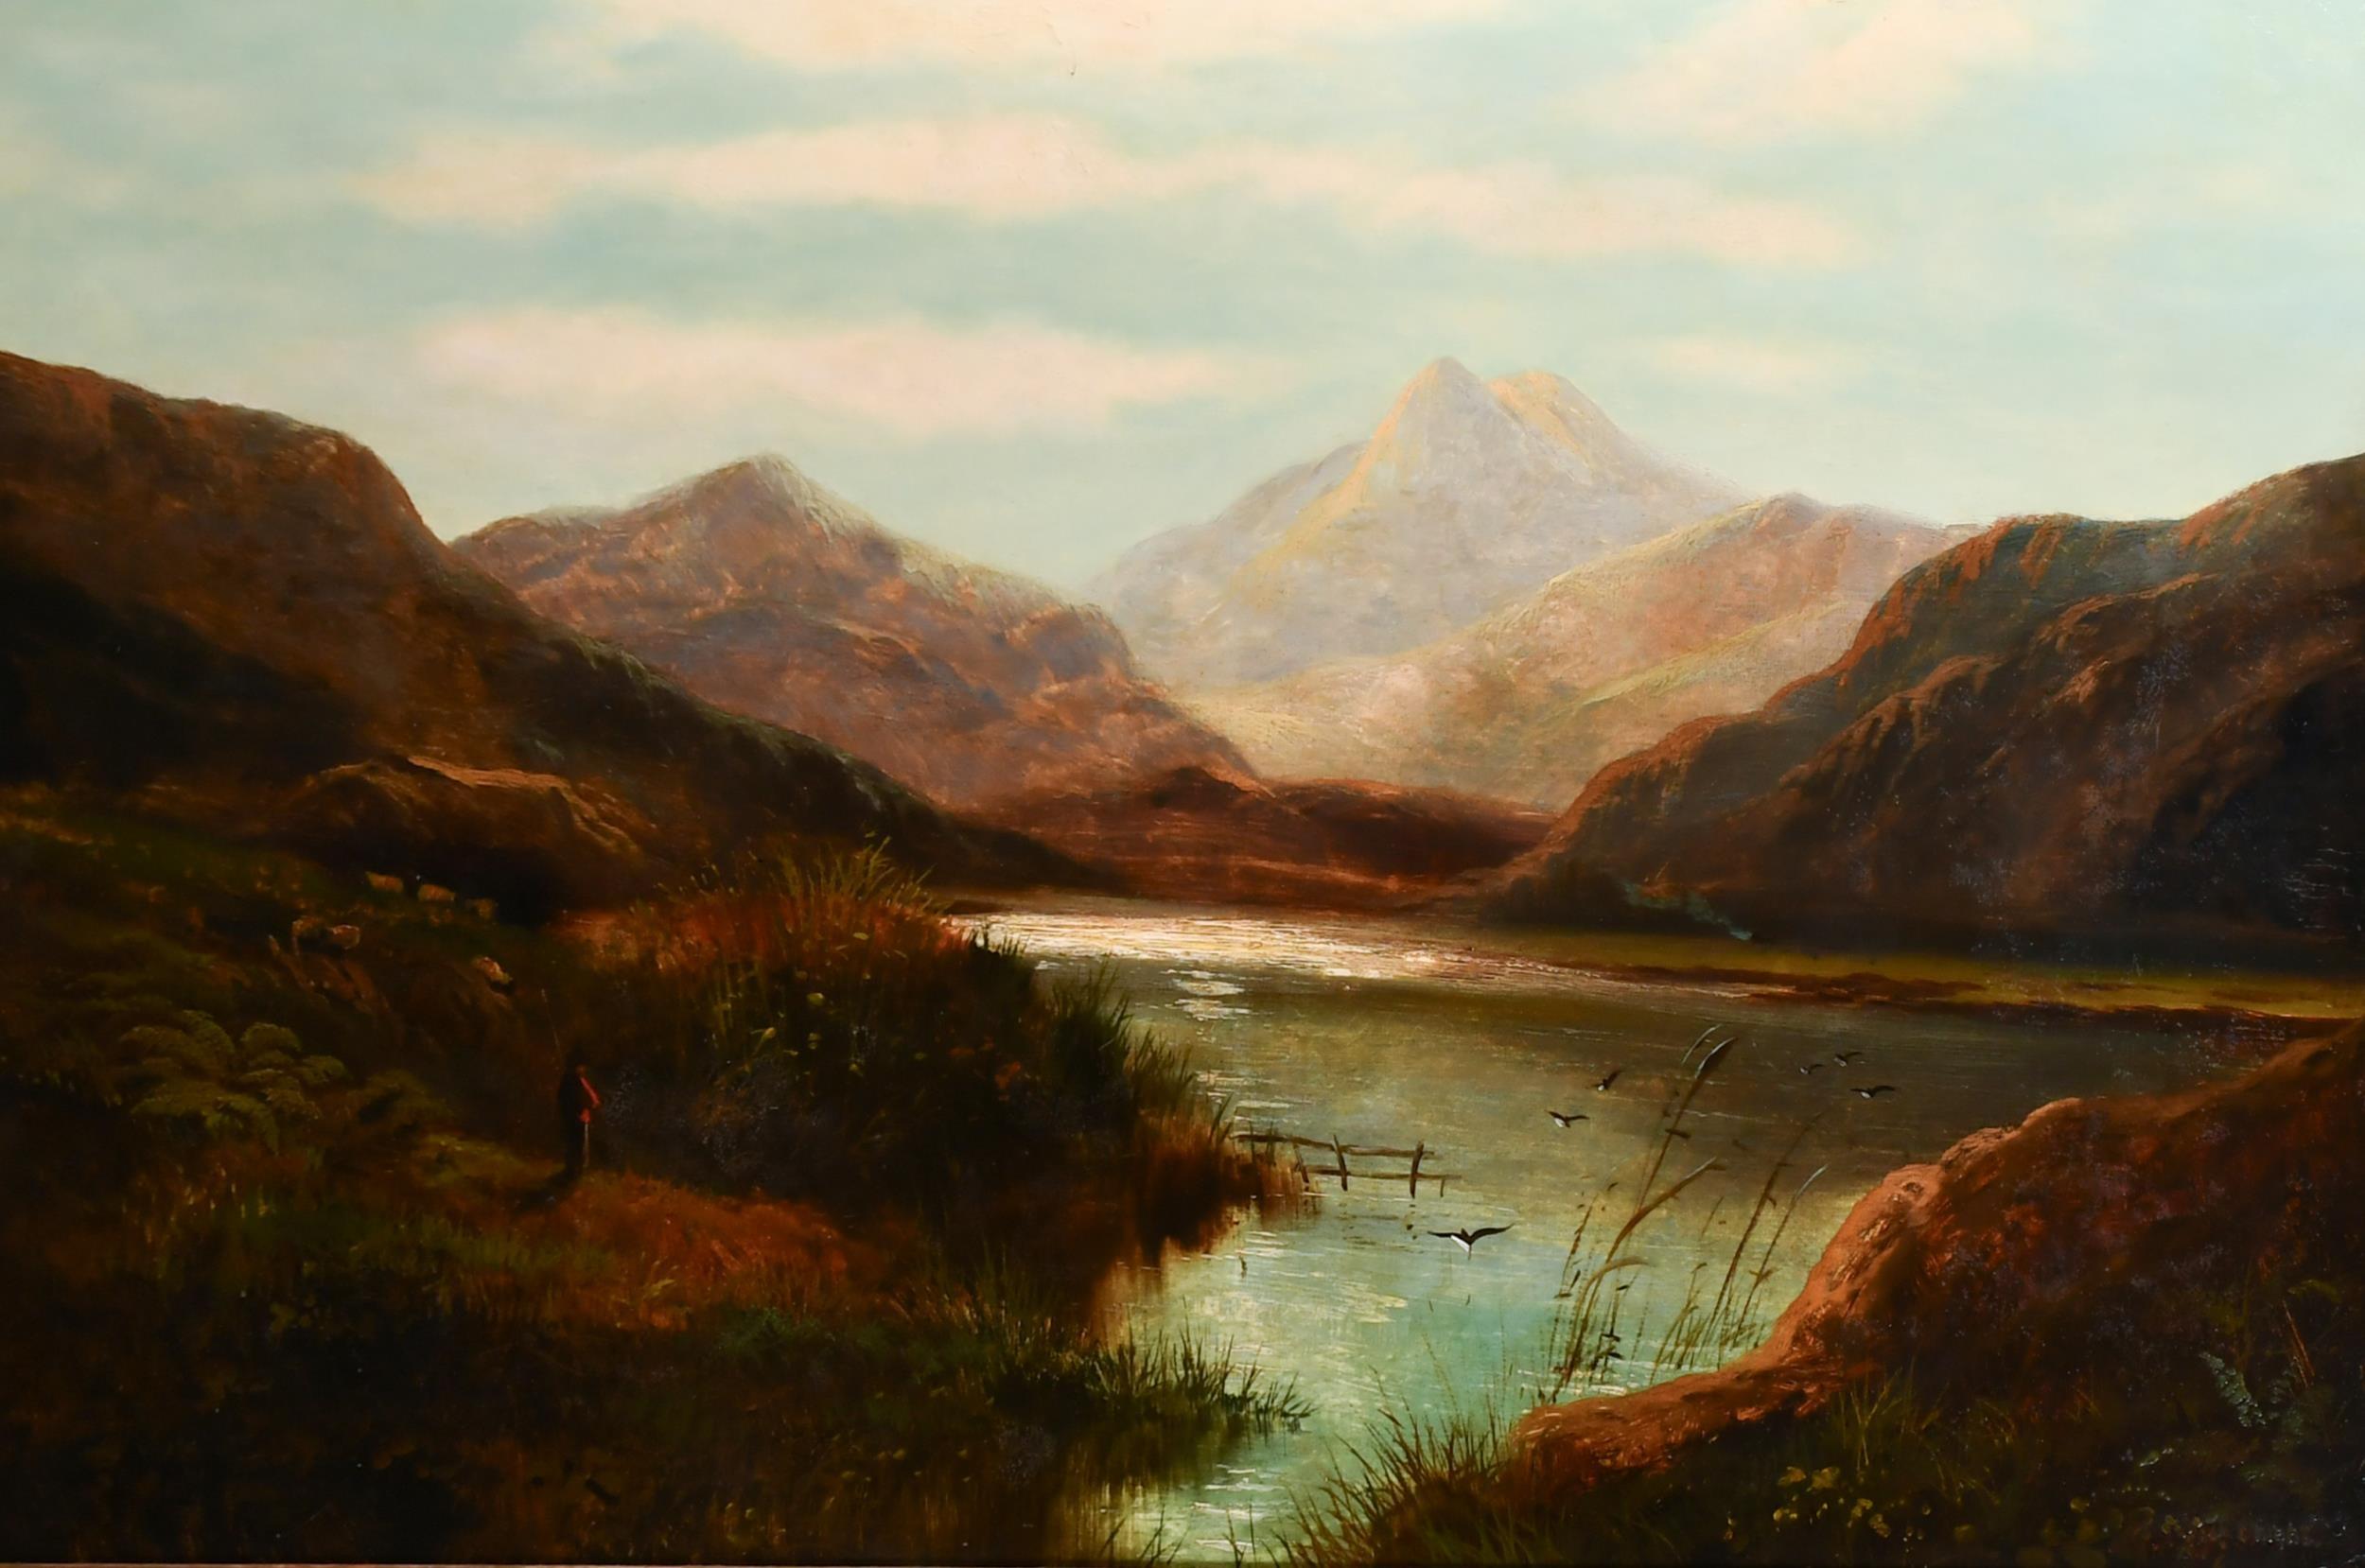 Admiring the View
Figure standing and admiring the majestic Scottish loch scene before him. 
Joseph Knight (1837-1909) British
signed lower corner
oil painting on canvas, framed
canvas: 30 x 50 inches
swept gilt frame with highly ornate moulding: 36